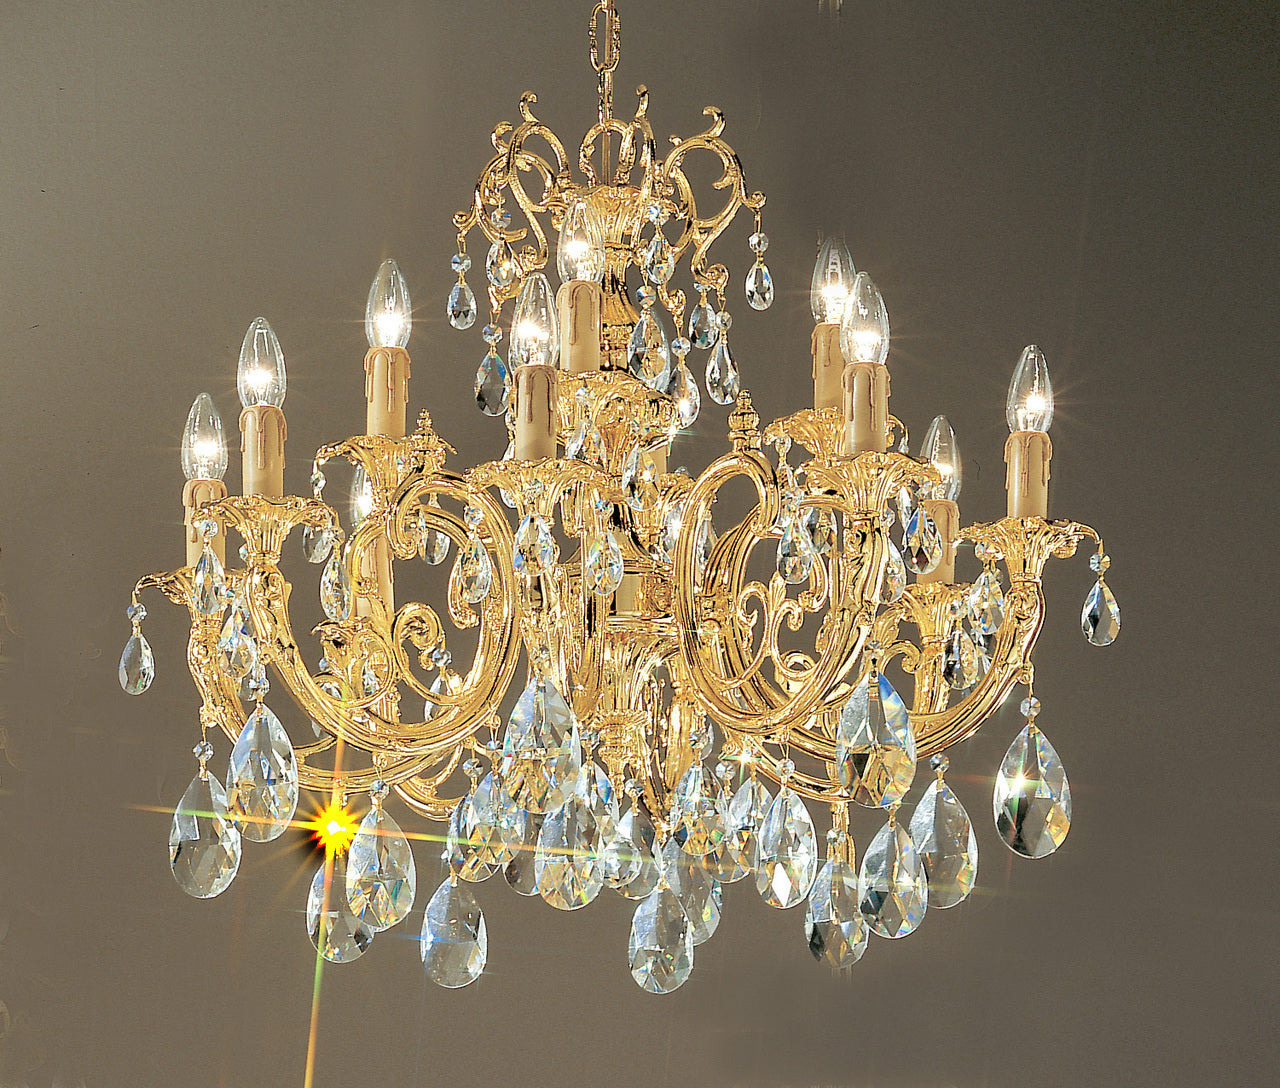 Classic Lighting 5712 G C Princeton Crystal/Cast Brass Chandelier in 24k Gold (Imported from Spain)